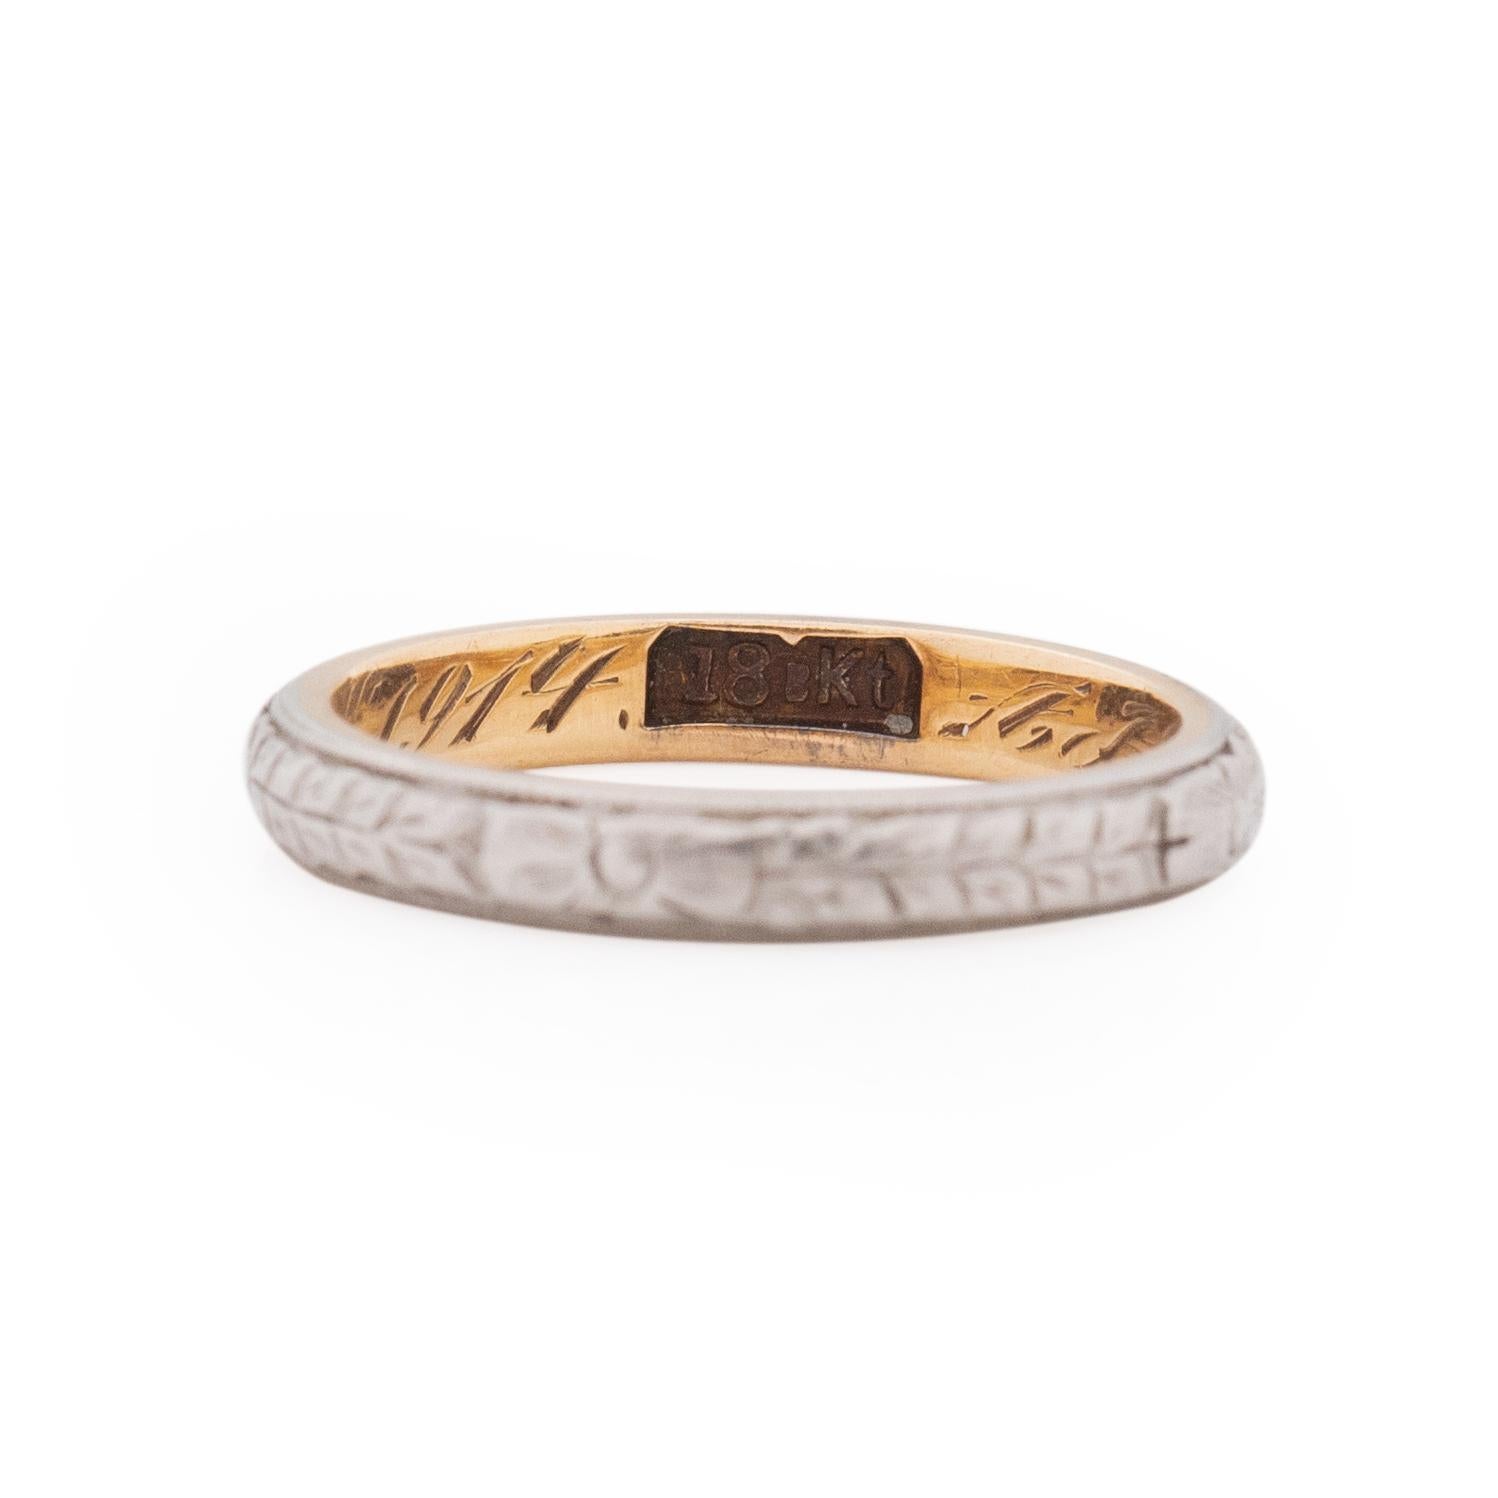 Here we have a out standing two tone art deco floral engraved vintage band. These two tone beauties are getting harder and harder to come by, the inside of the band is yellow gold with a hopelessly romantic engraving on the inside. Giving us the